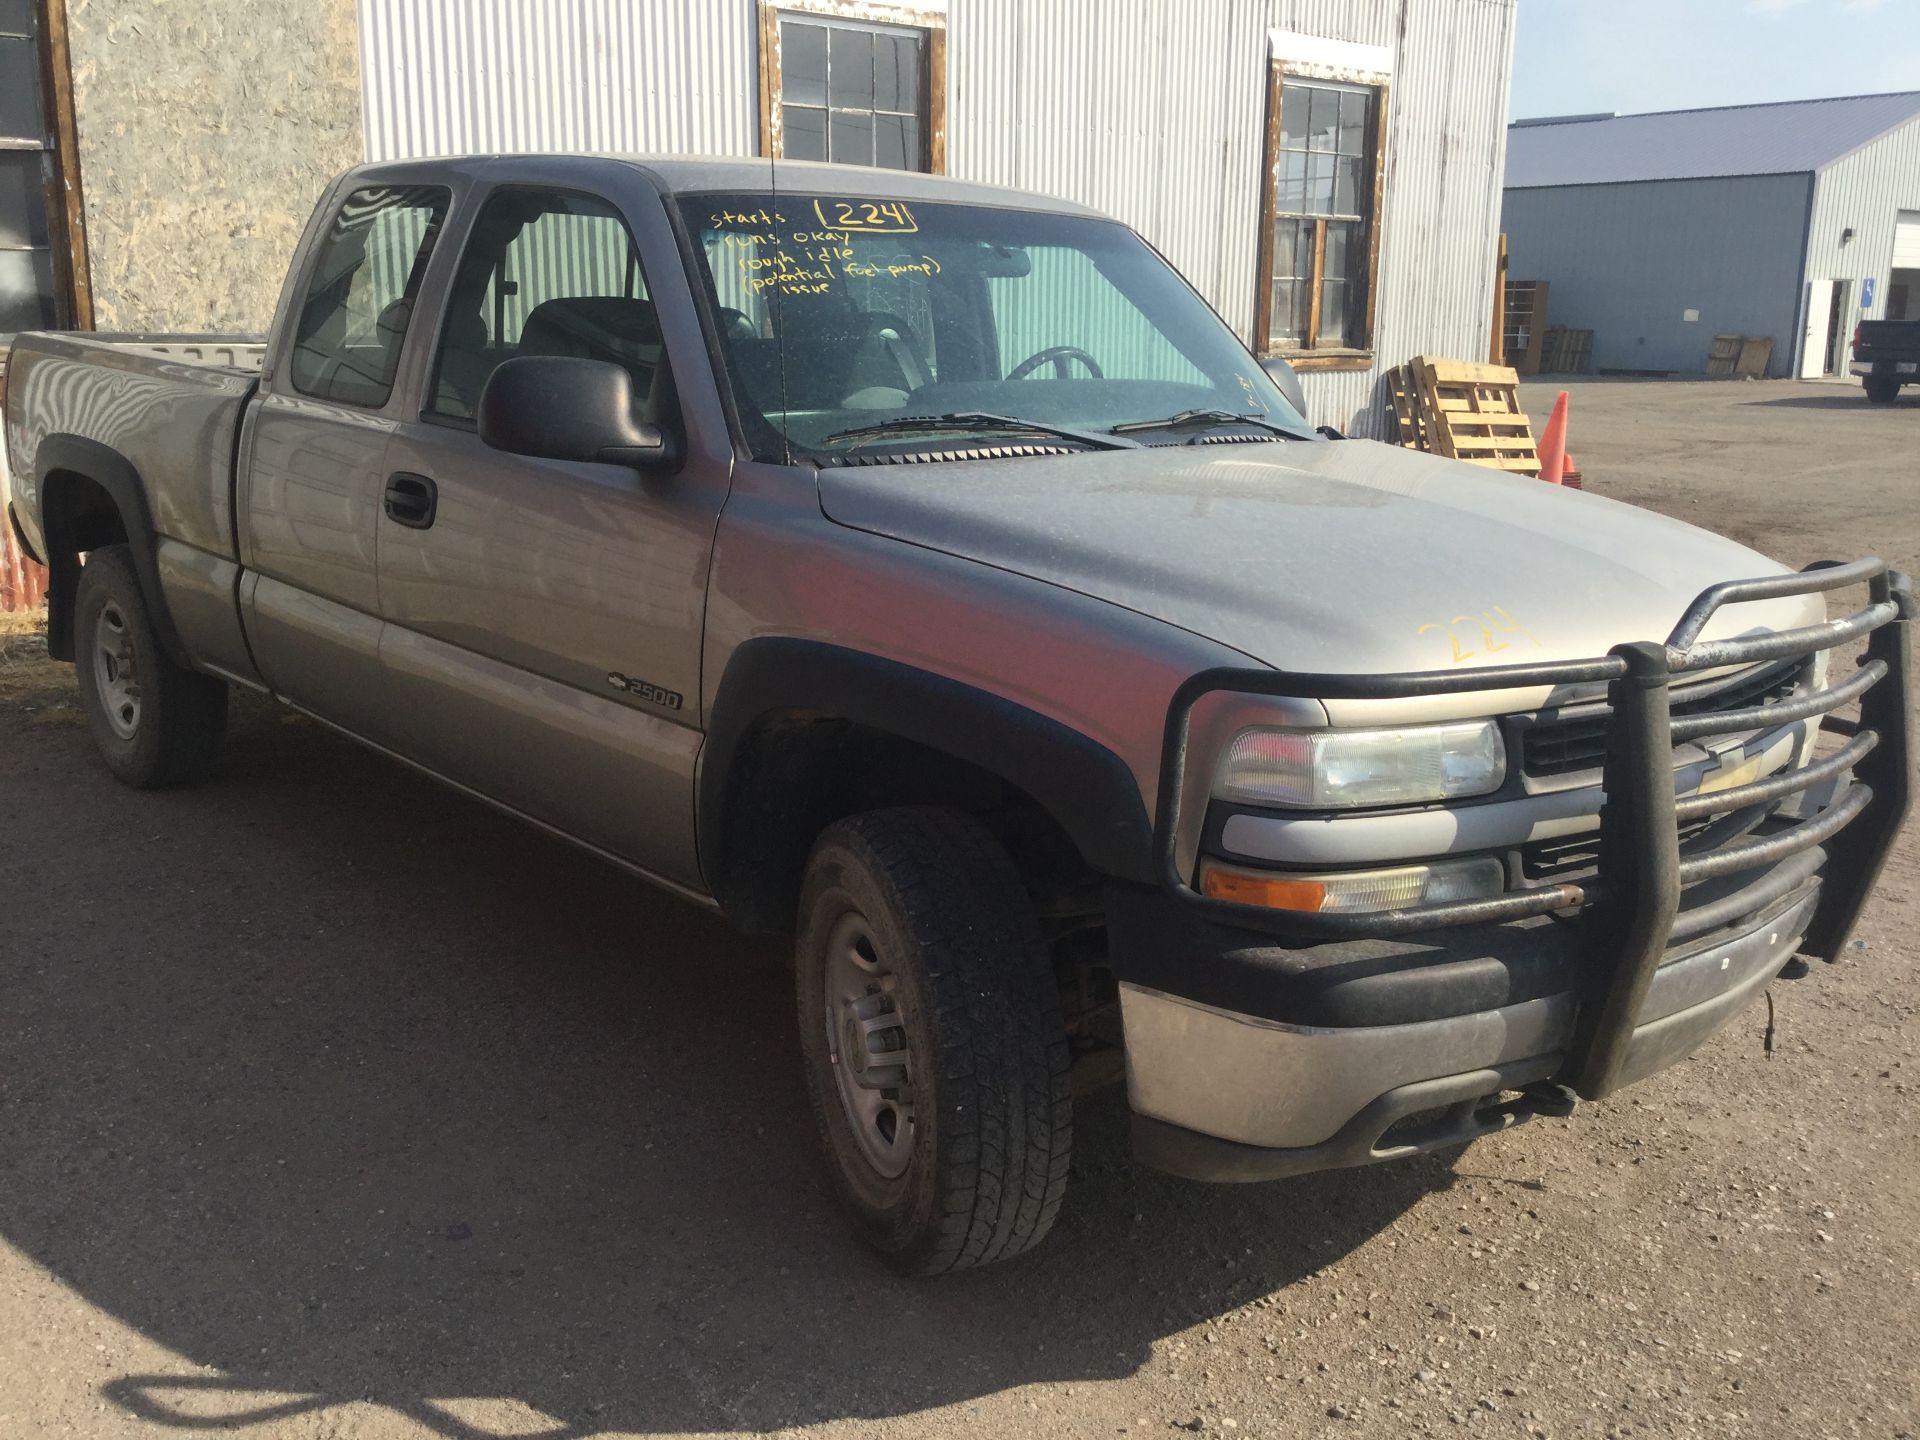 Year: 2002 Make: Chevy Model: 3/4T Type: Pickup Vin#: 234762 Mileage/Hours: 194314 6.0L, 4x4, XC, - Image 4 of 6